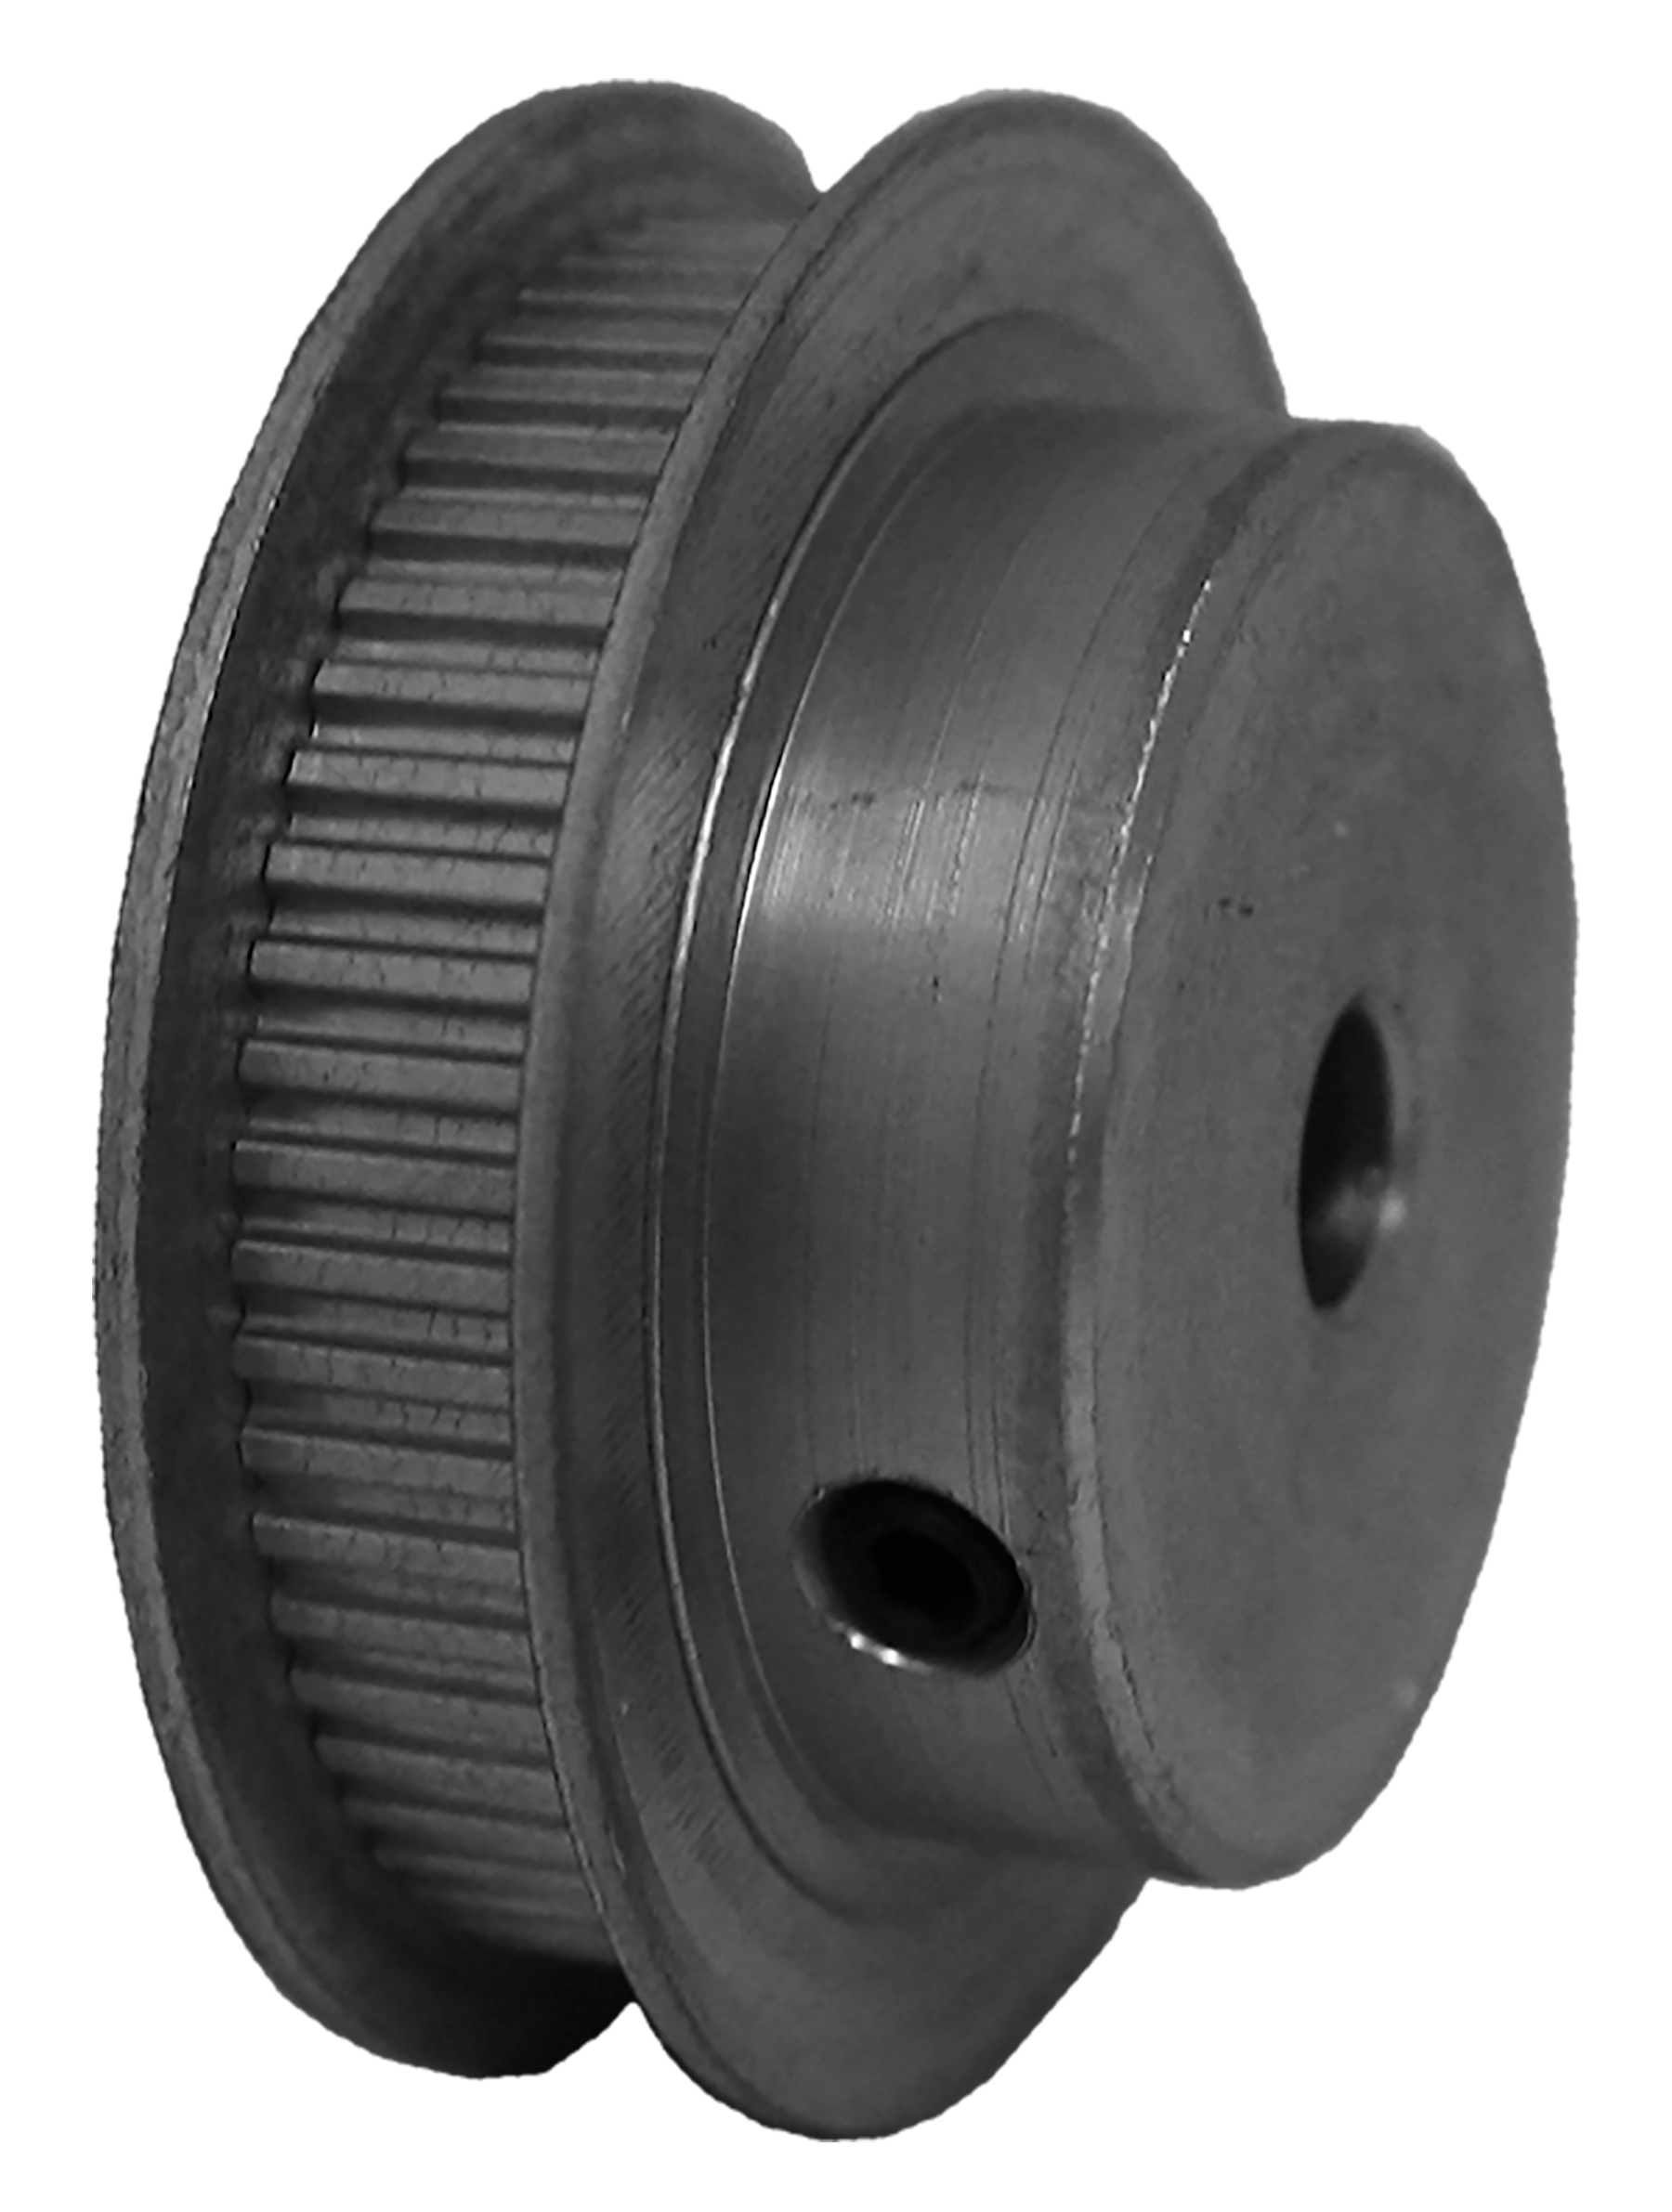 60MP025-6FA3 - Aluminum Imperial Pitch Pulleys